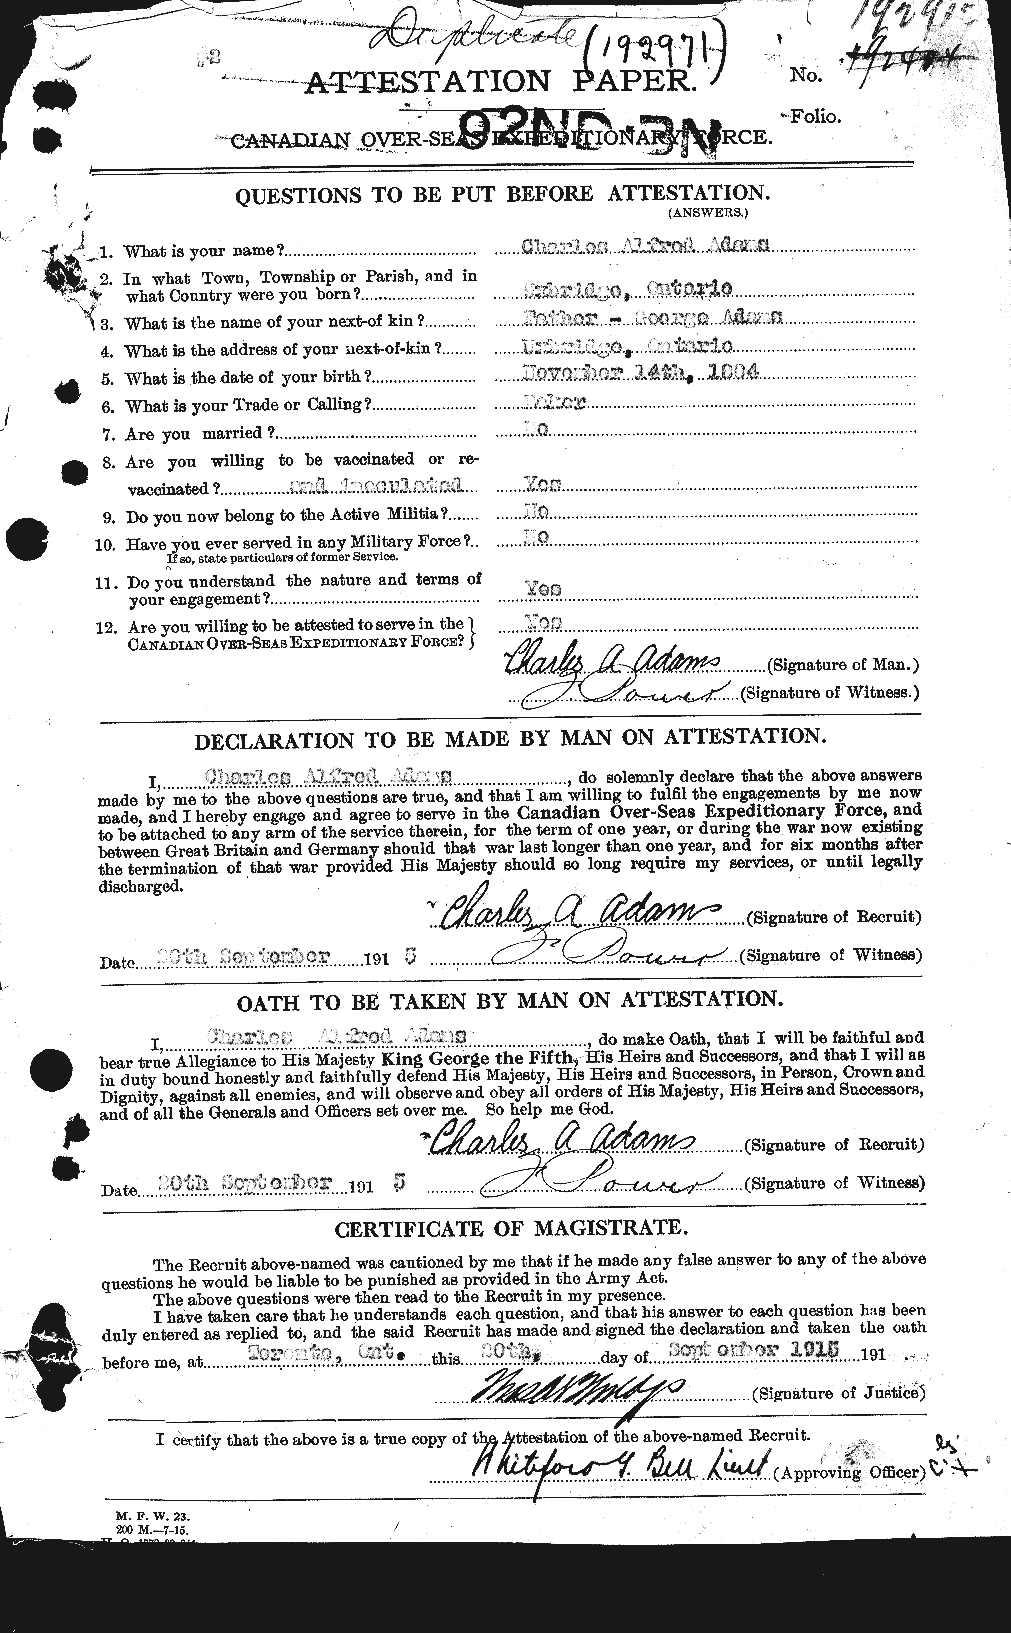 Personnel Records of the First World War - CEF 202058a